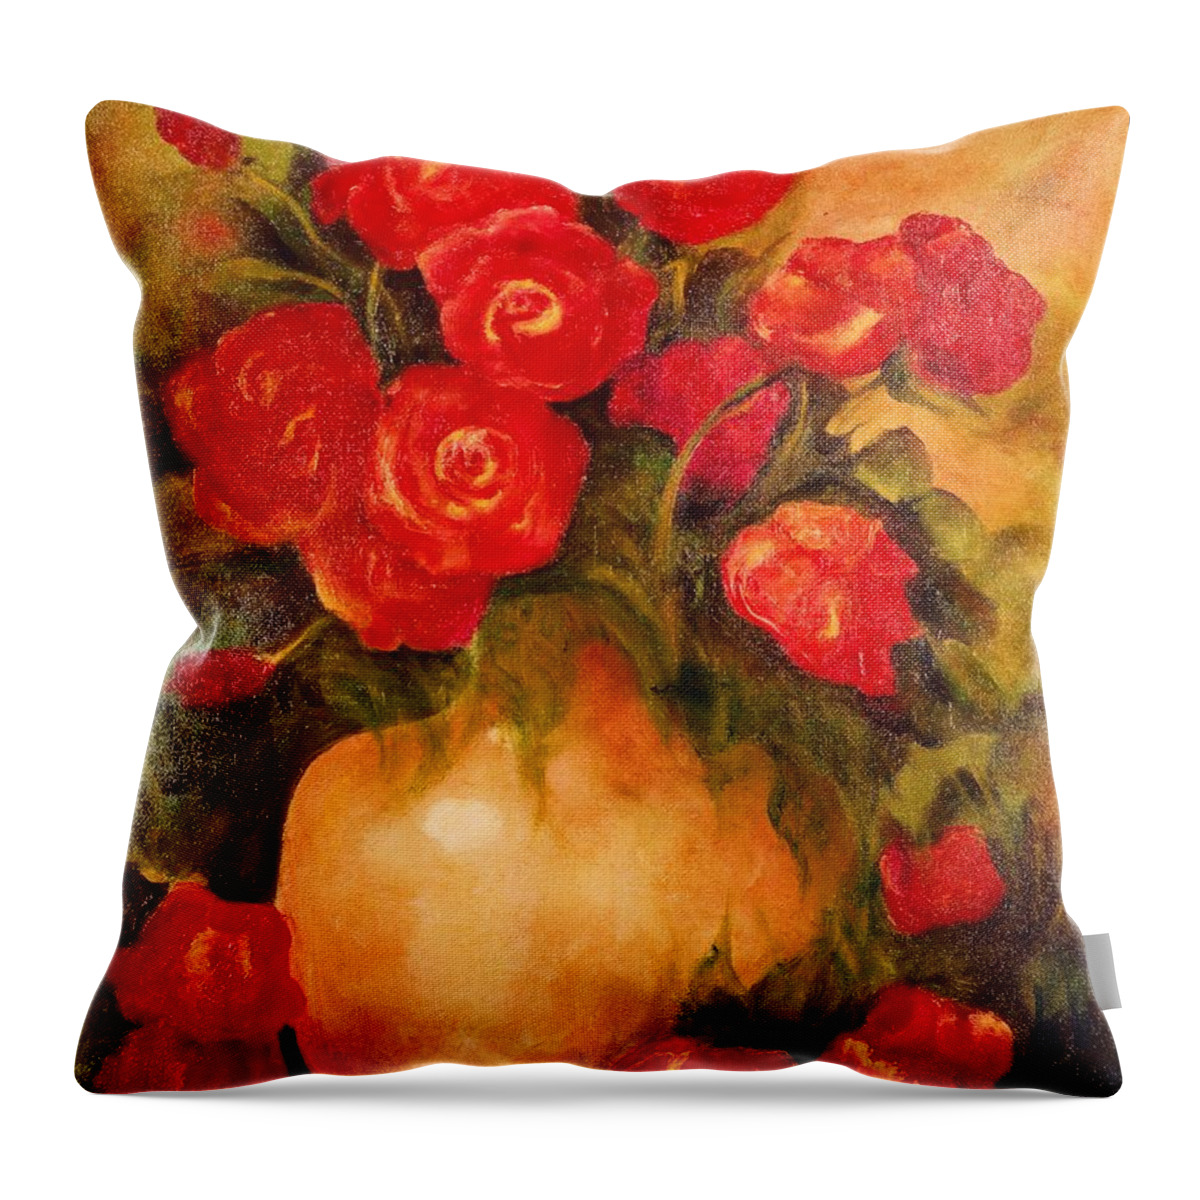 Red Roses In Vase Throw Pillow featuring the painting Antique Red Roses by Jordana Sands